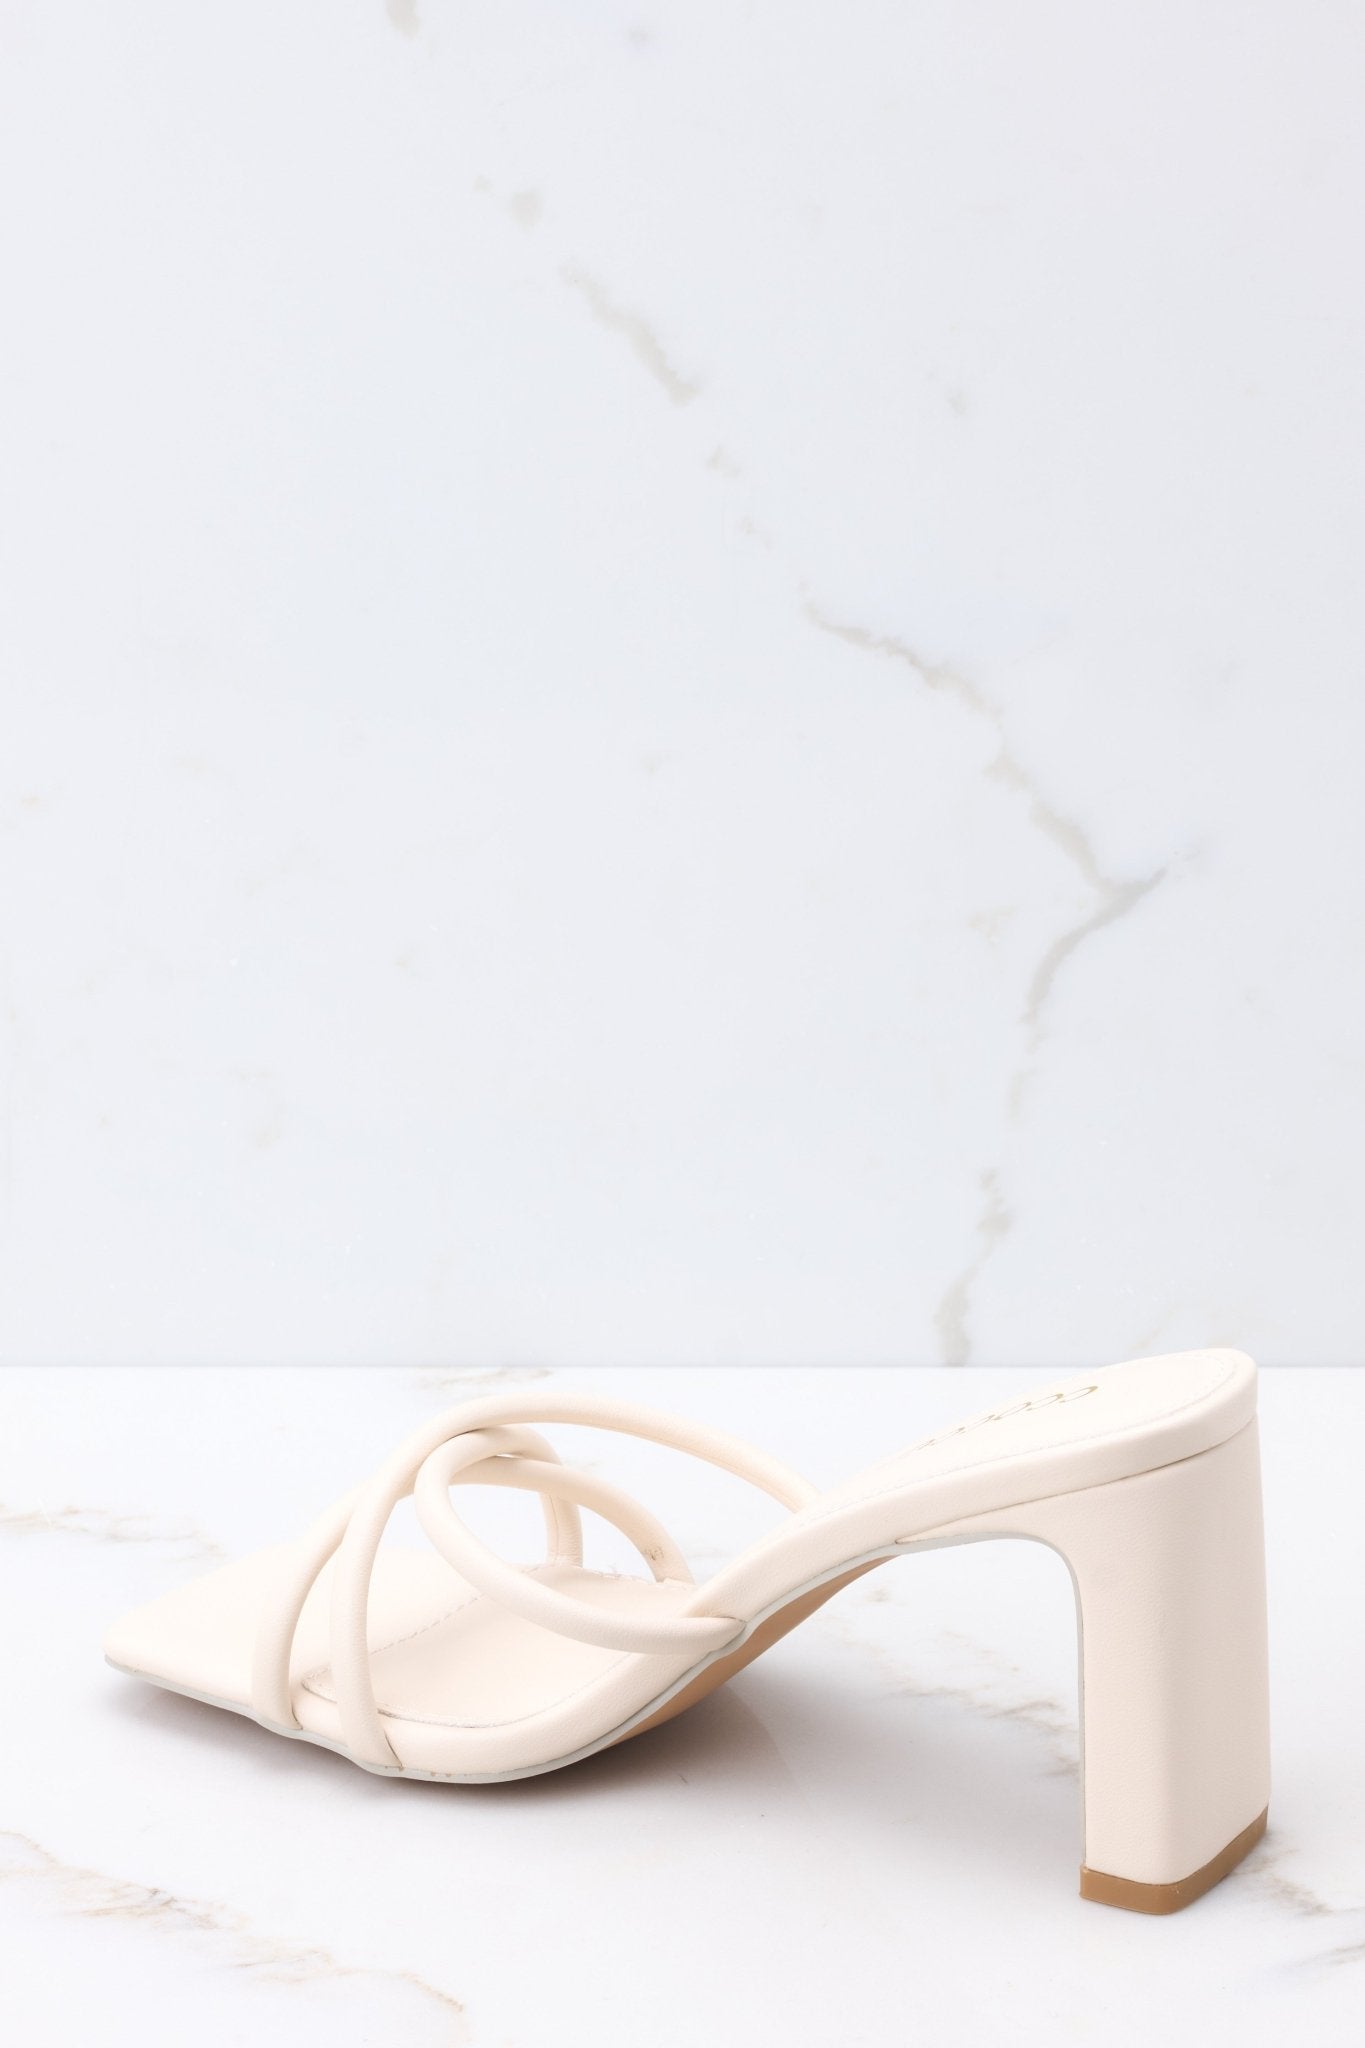 Inner-side view of these sandals that feature a textured ivory-colored finish, three straps across the top of the foot, a flattened block heel, and light cushioning in the base.